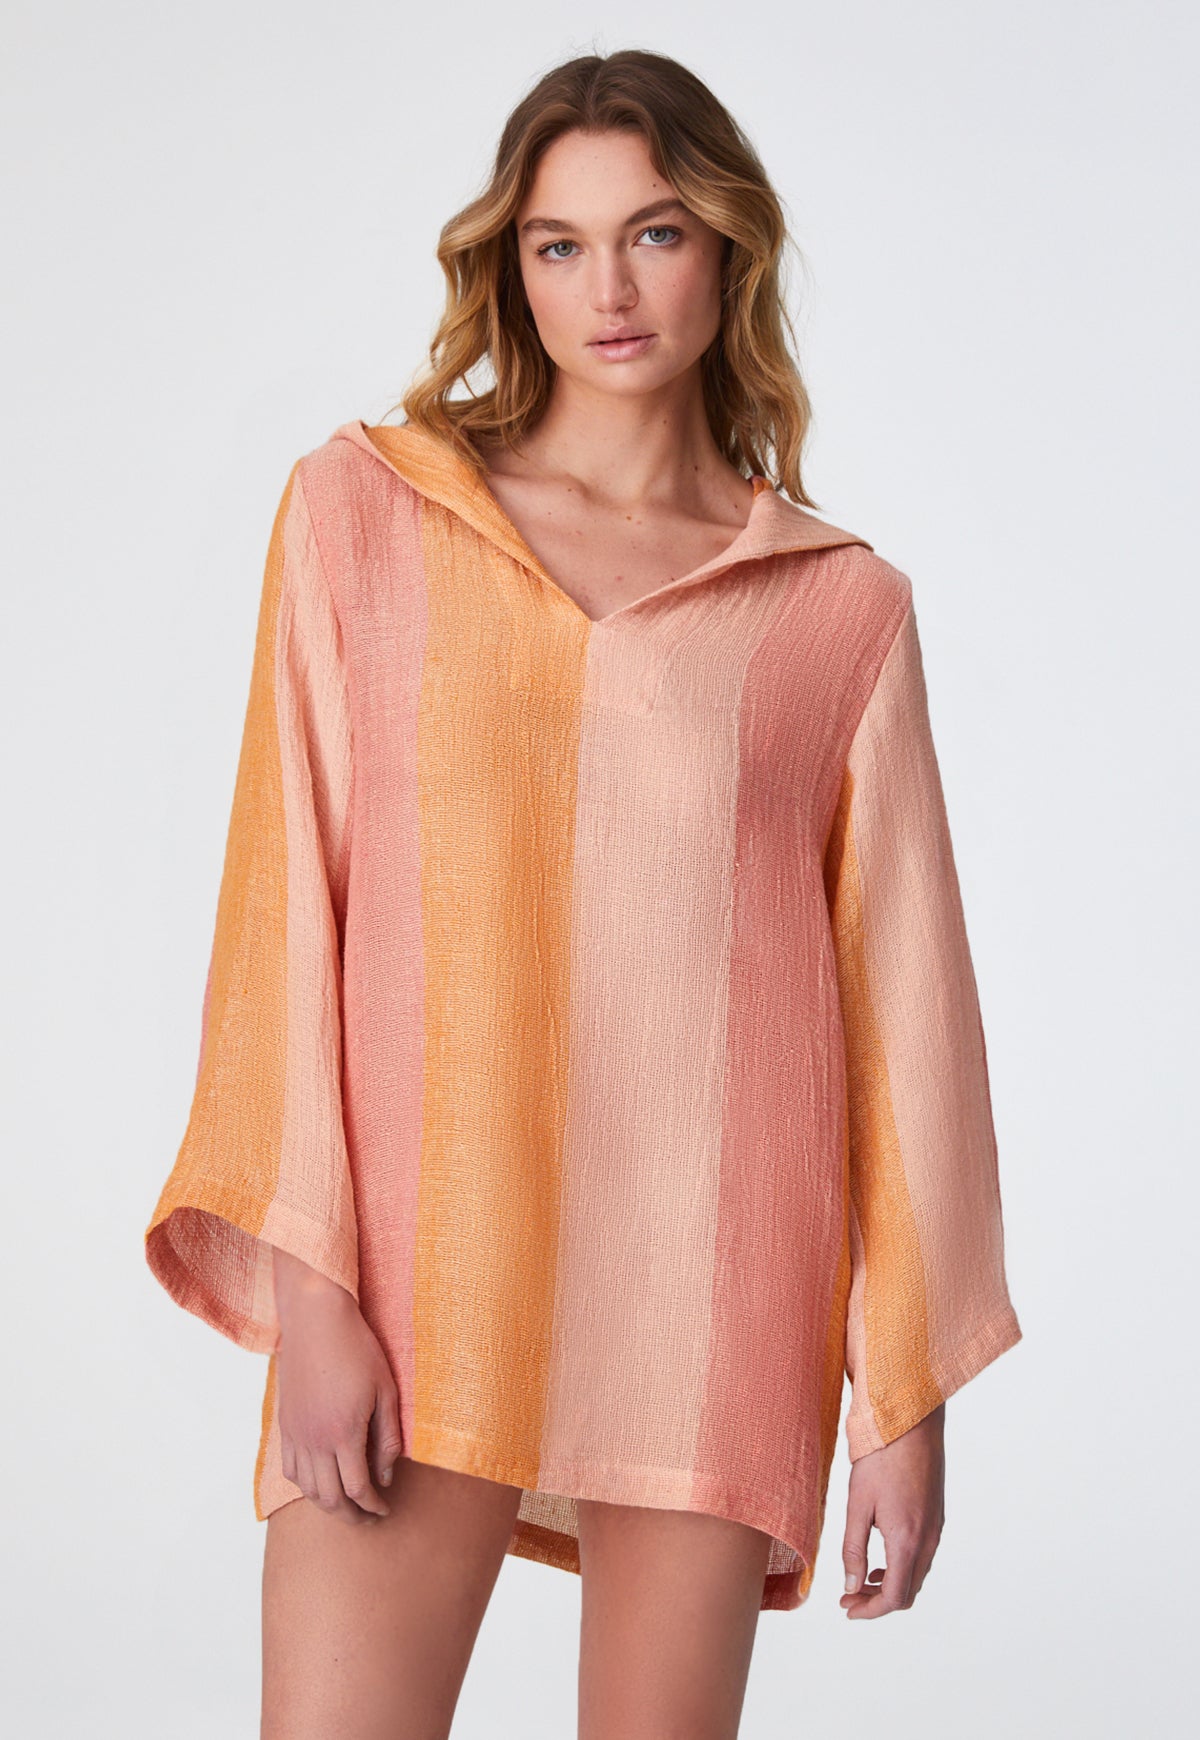 THE BEACH TUNIC in SUNSET AWNING STRIPED GAUZE